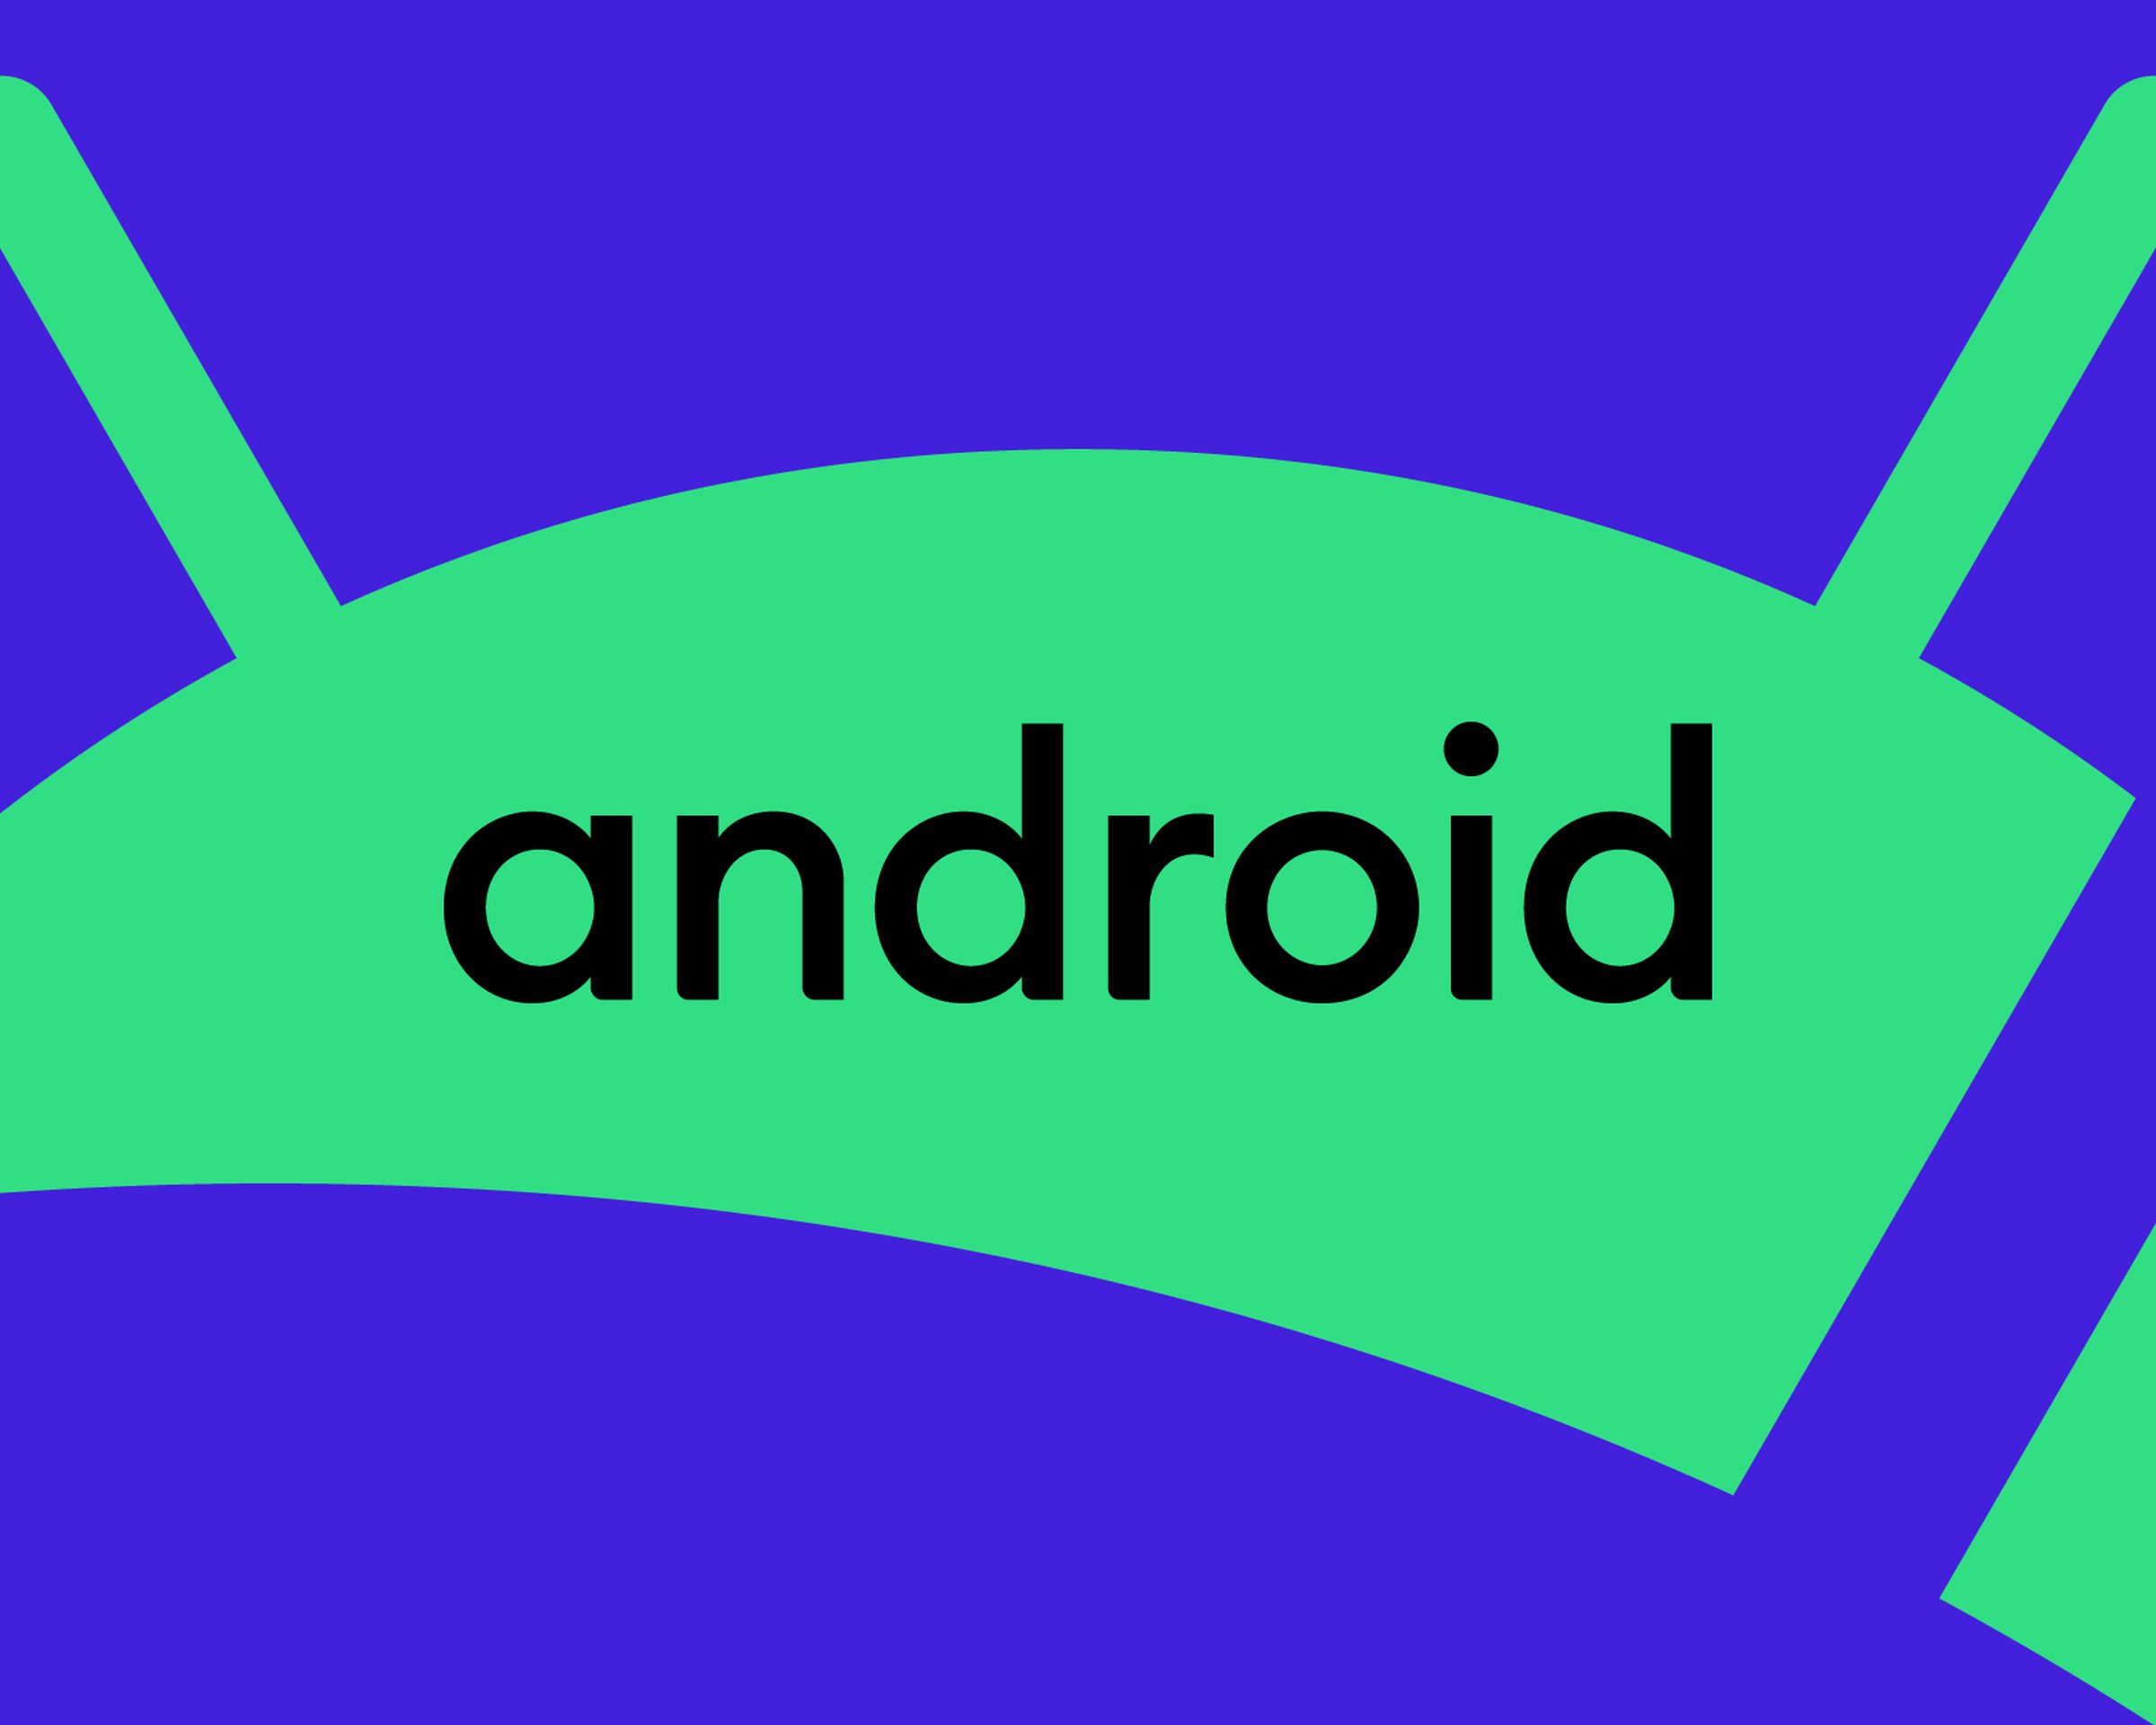 Android logo on a green and blue background